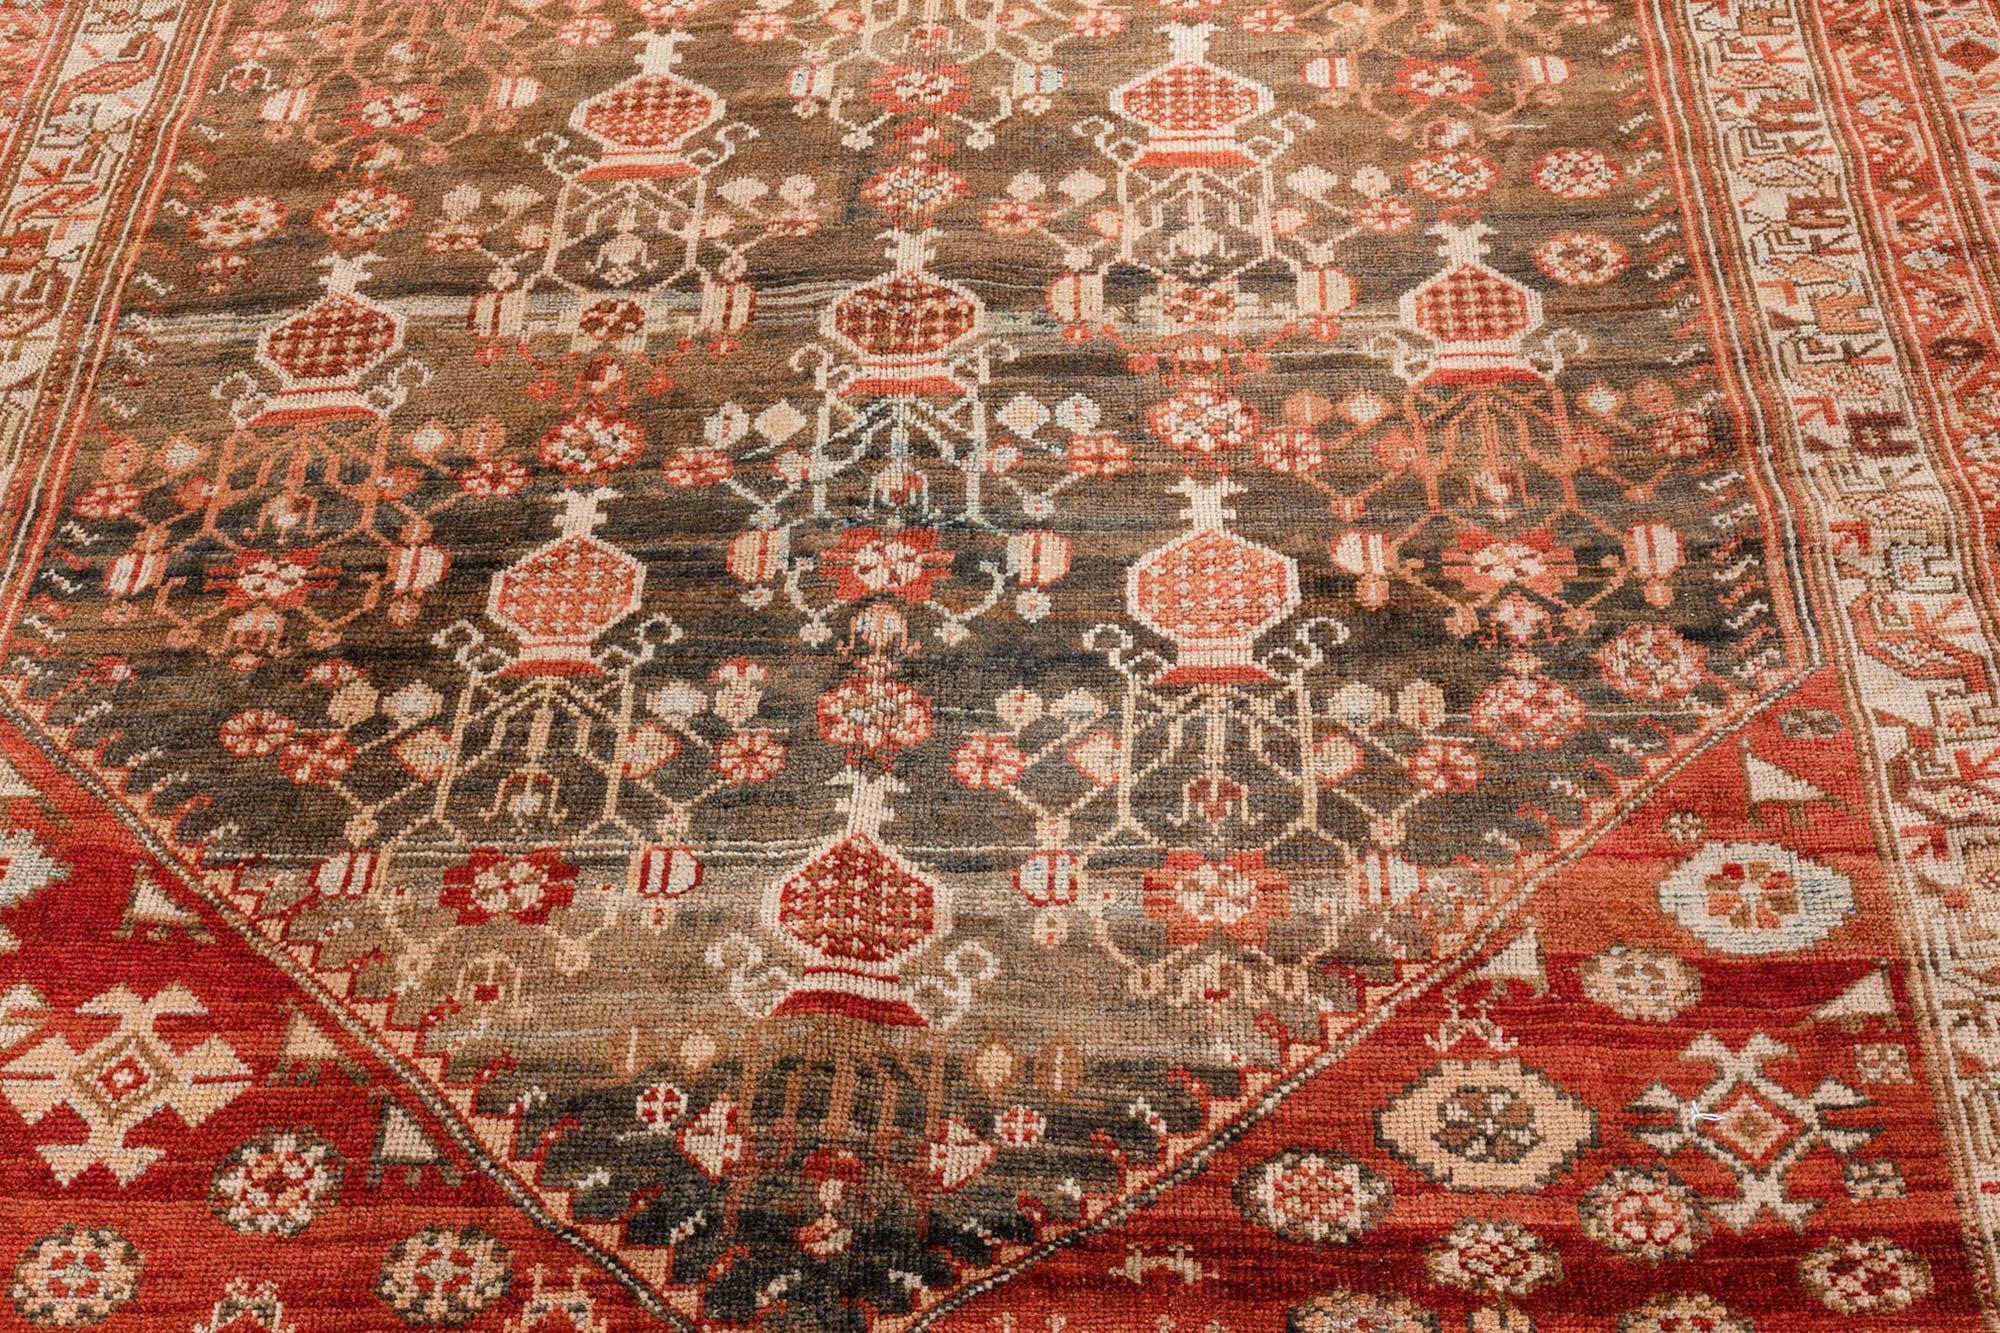 Antique Persian Malayer Rug
Size: 5'10